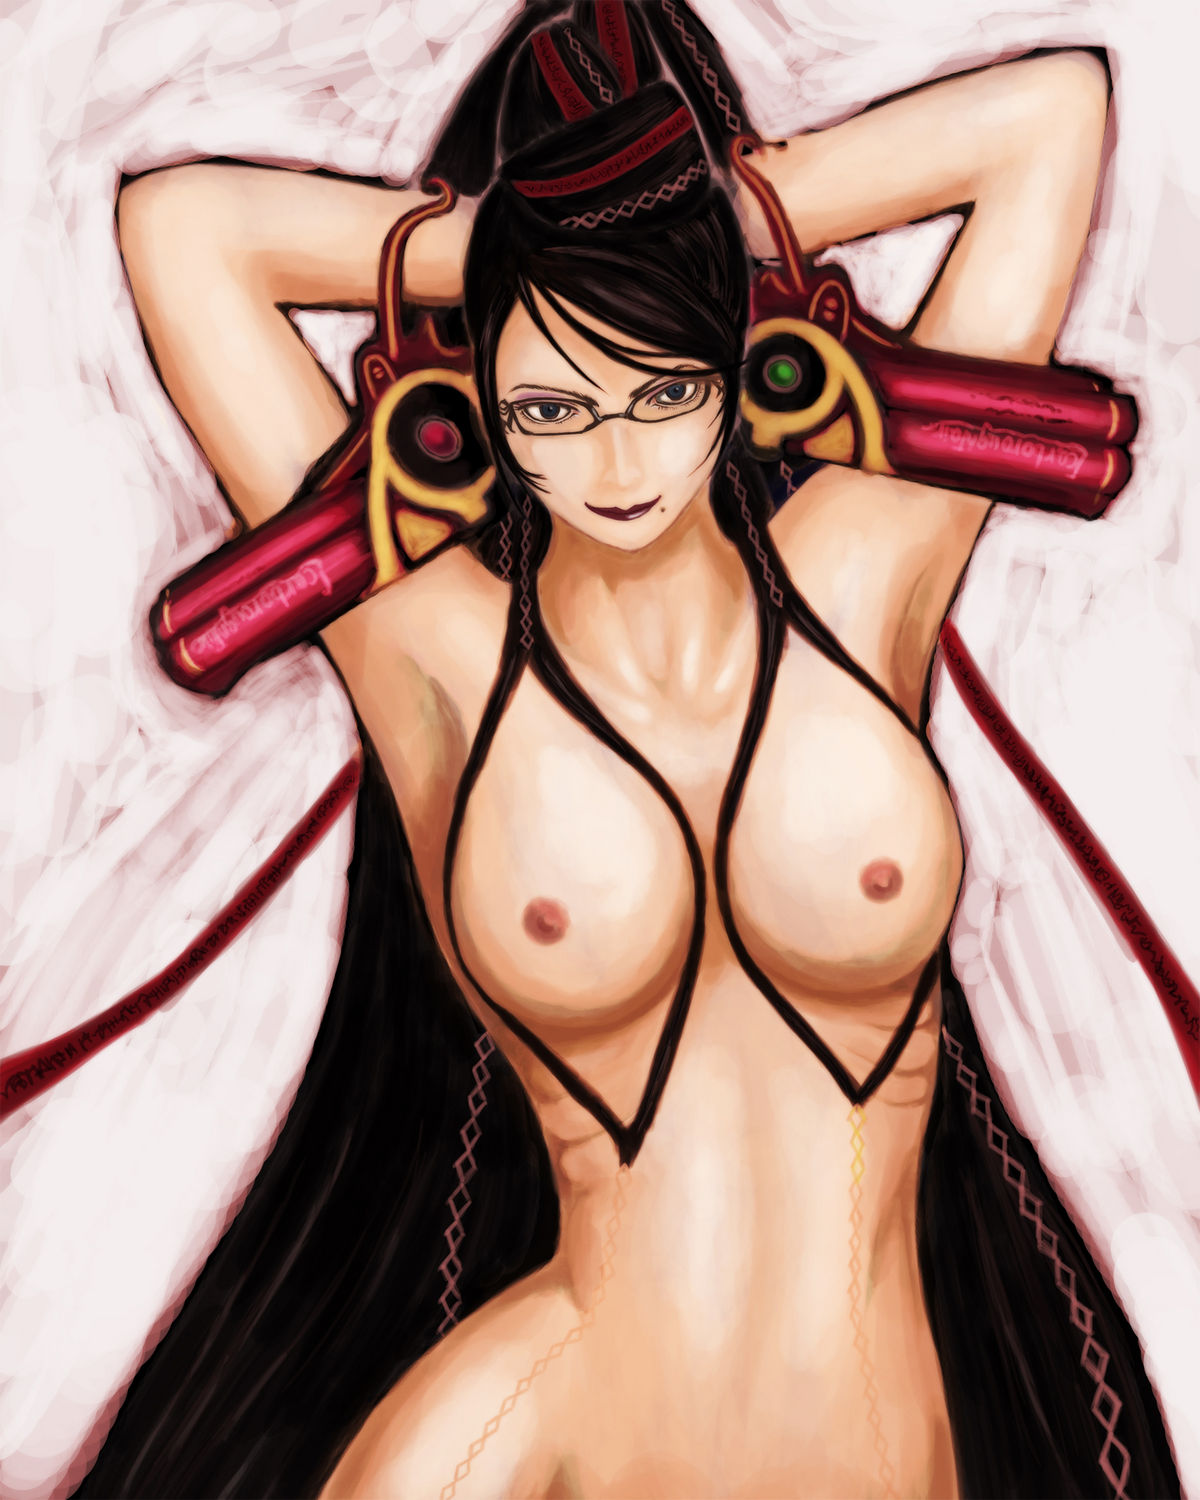 More Bayonetta Pictures.